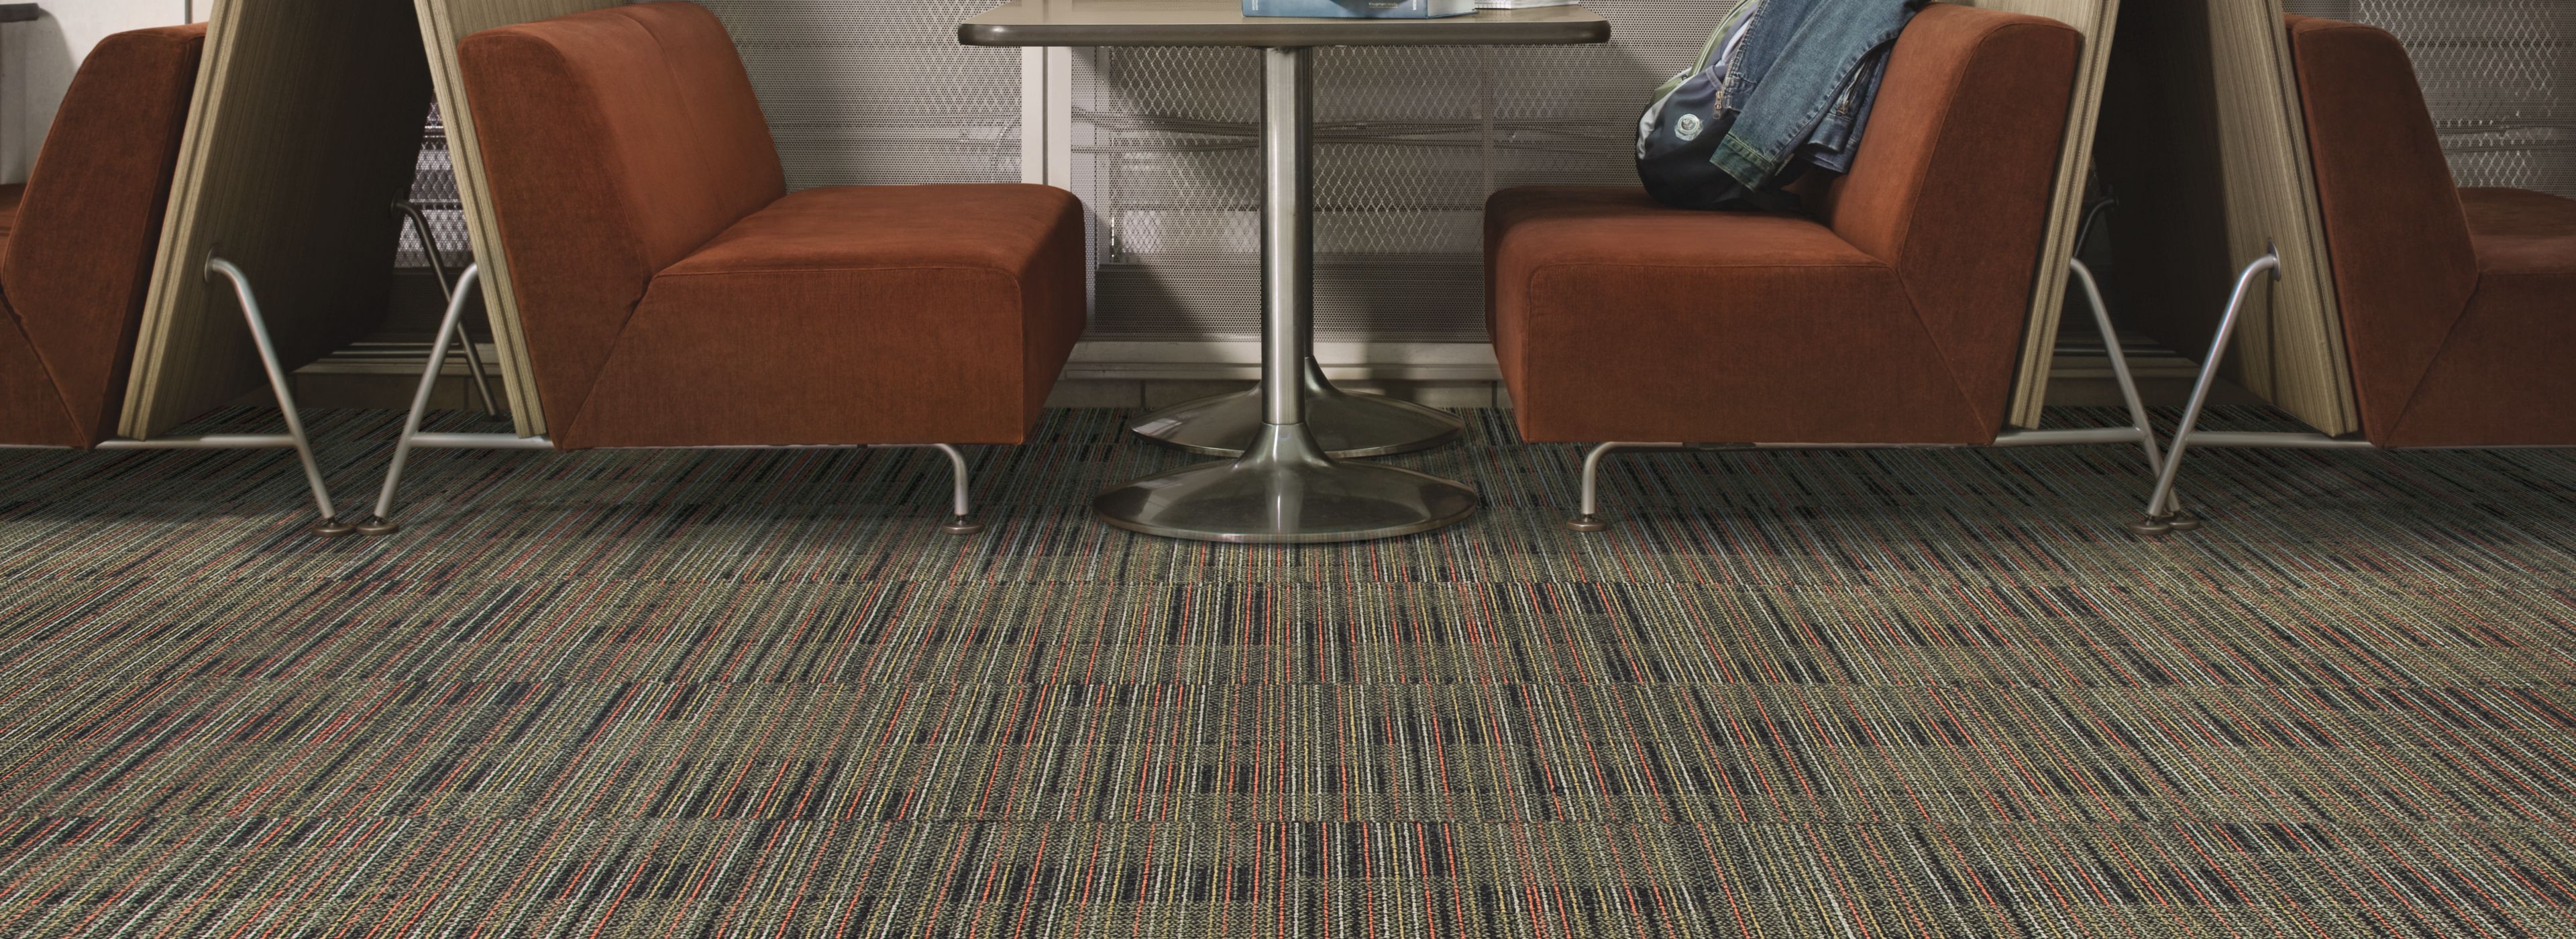 Interface Gather carpet tile with booths against large windows image number 1